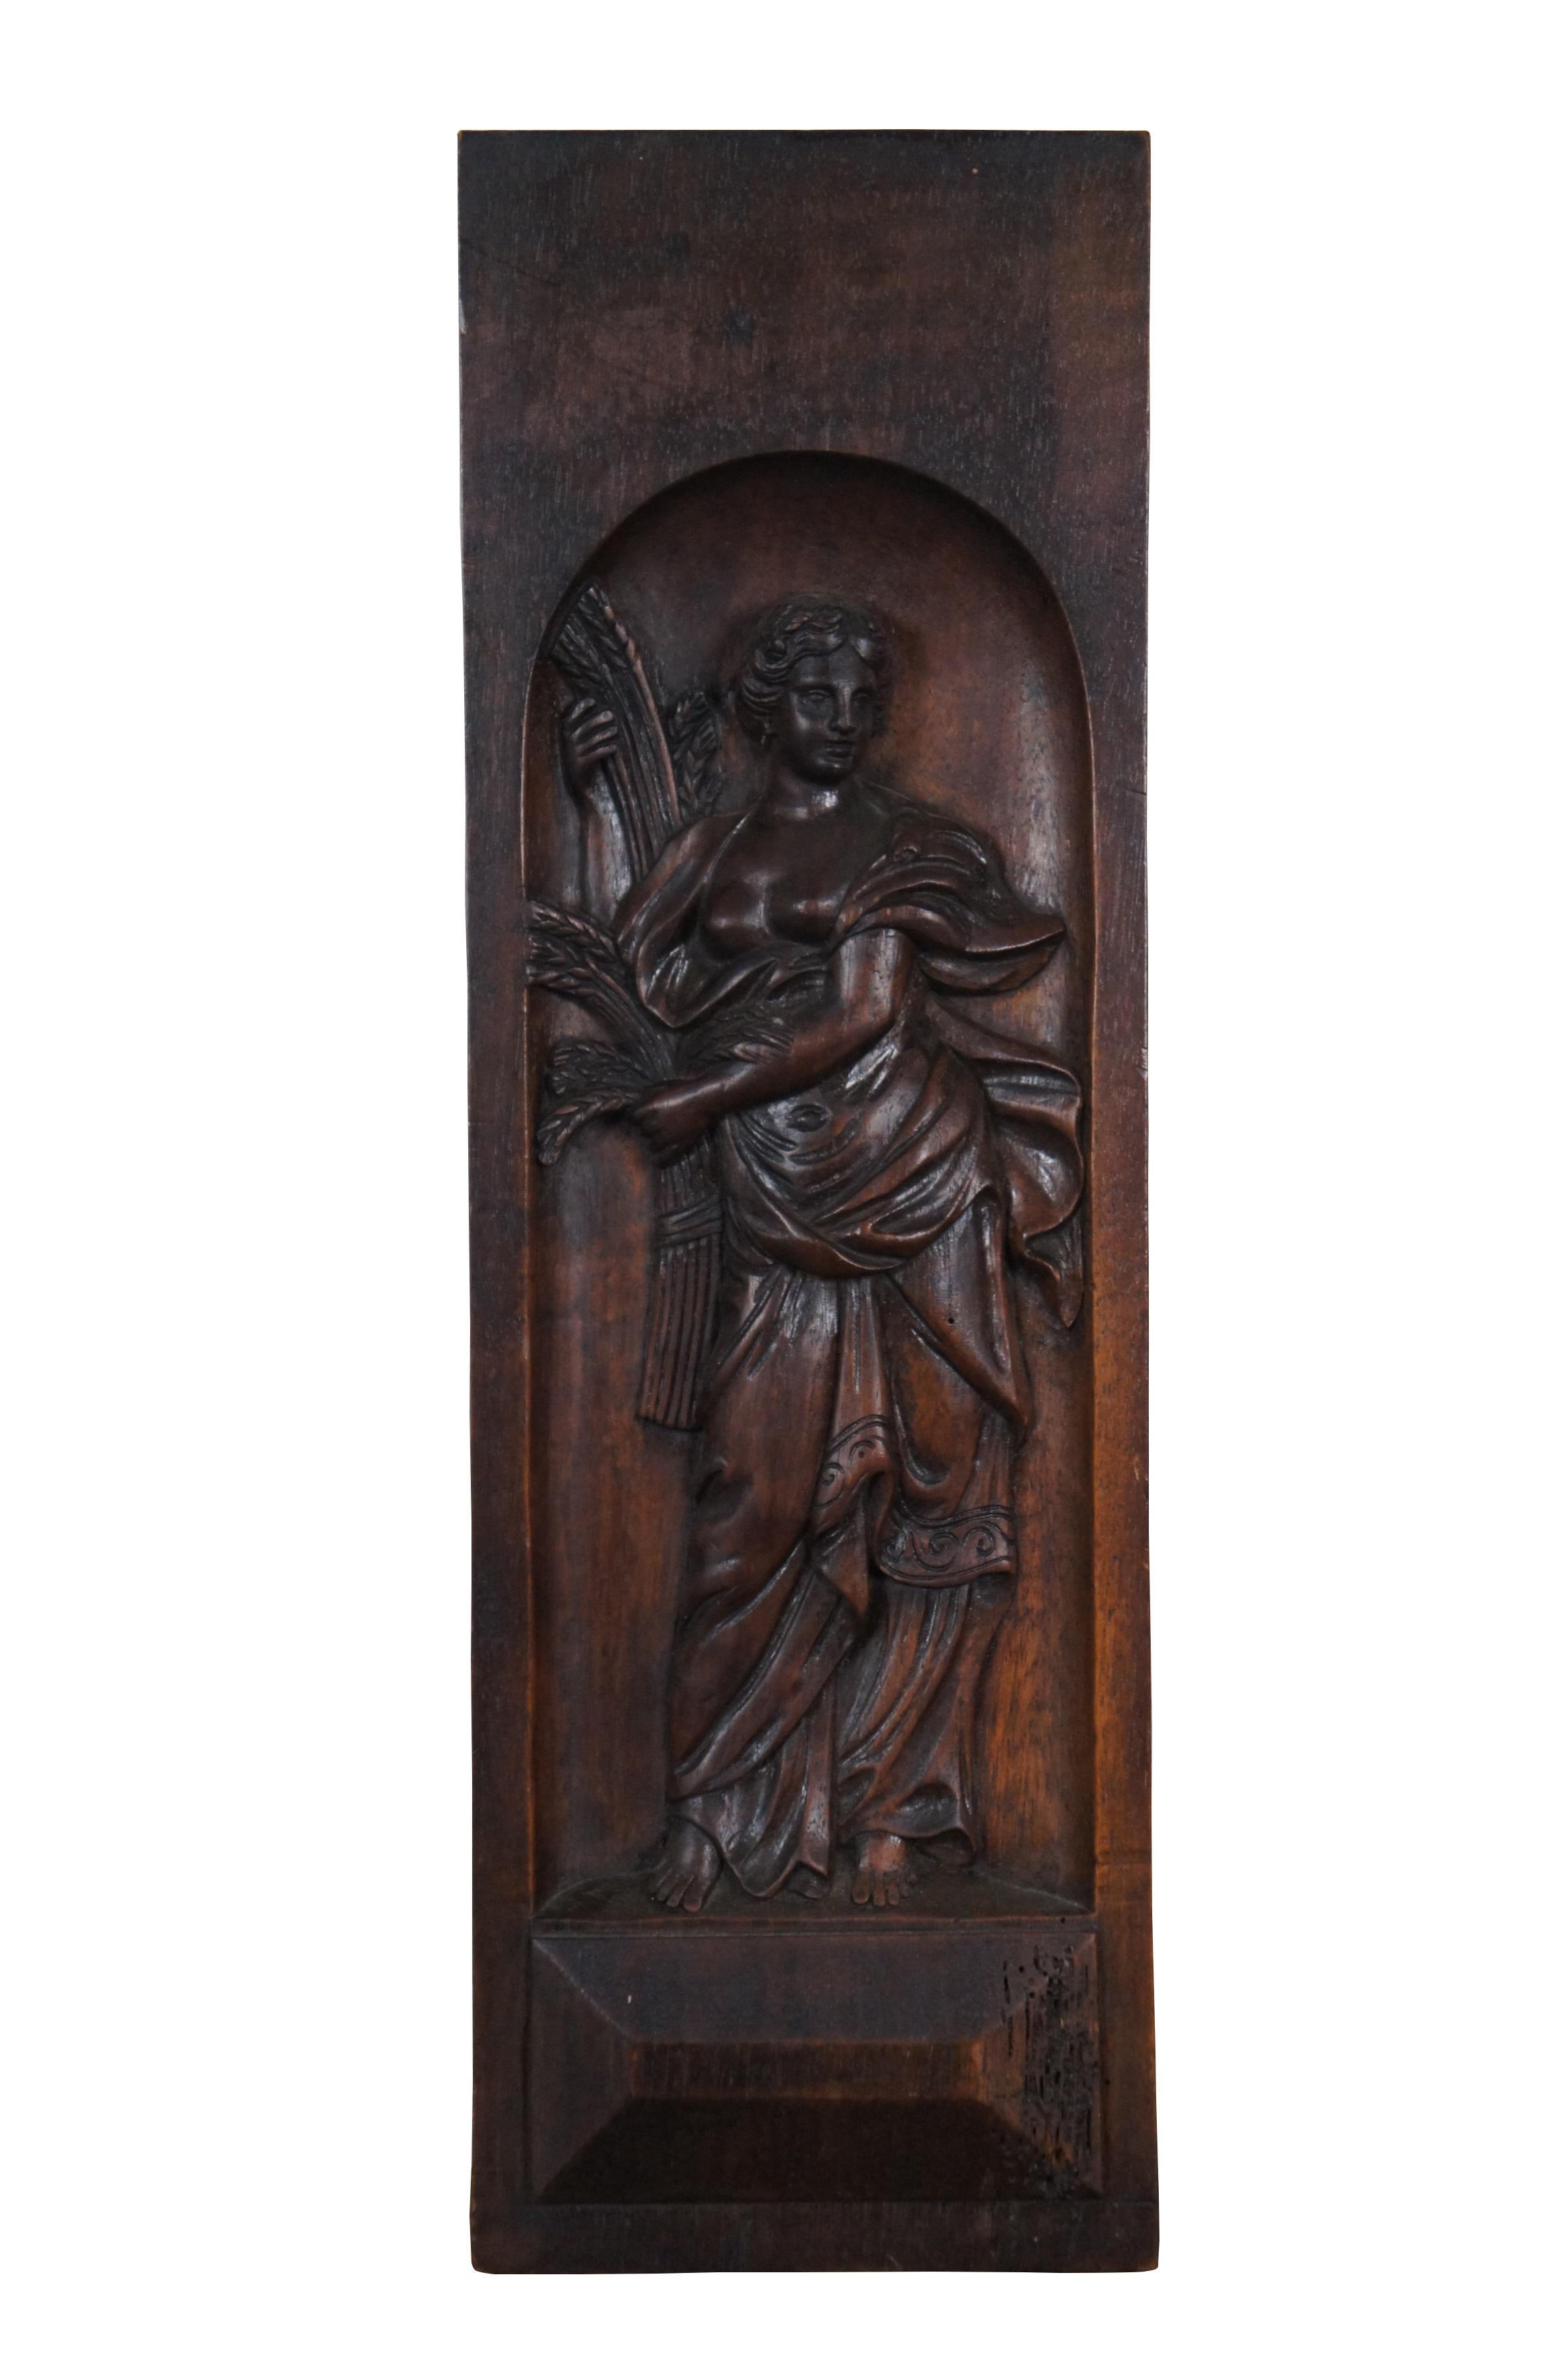 Pair of antique hand carved walnut bas relief panels / wall plaques, showing Neoclassical female figures, one holding sheaves of wheat and the other holding flowers.

Dimensions:
6.5